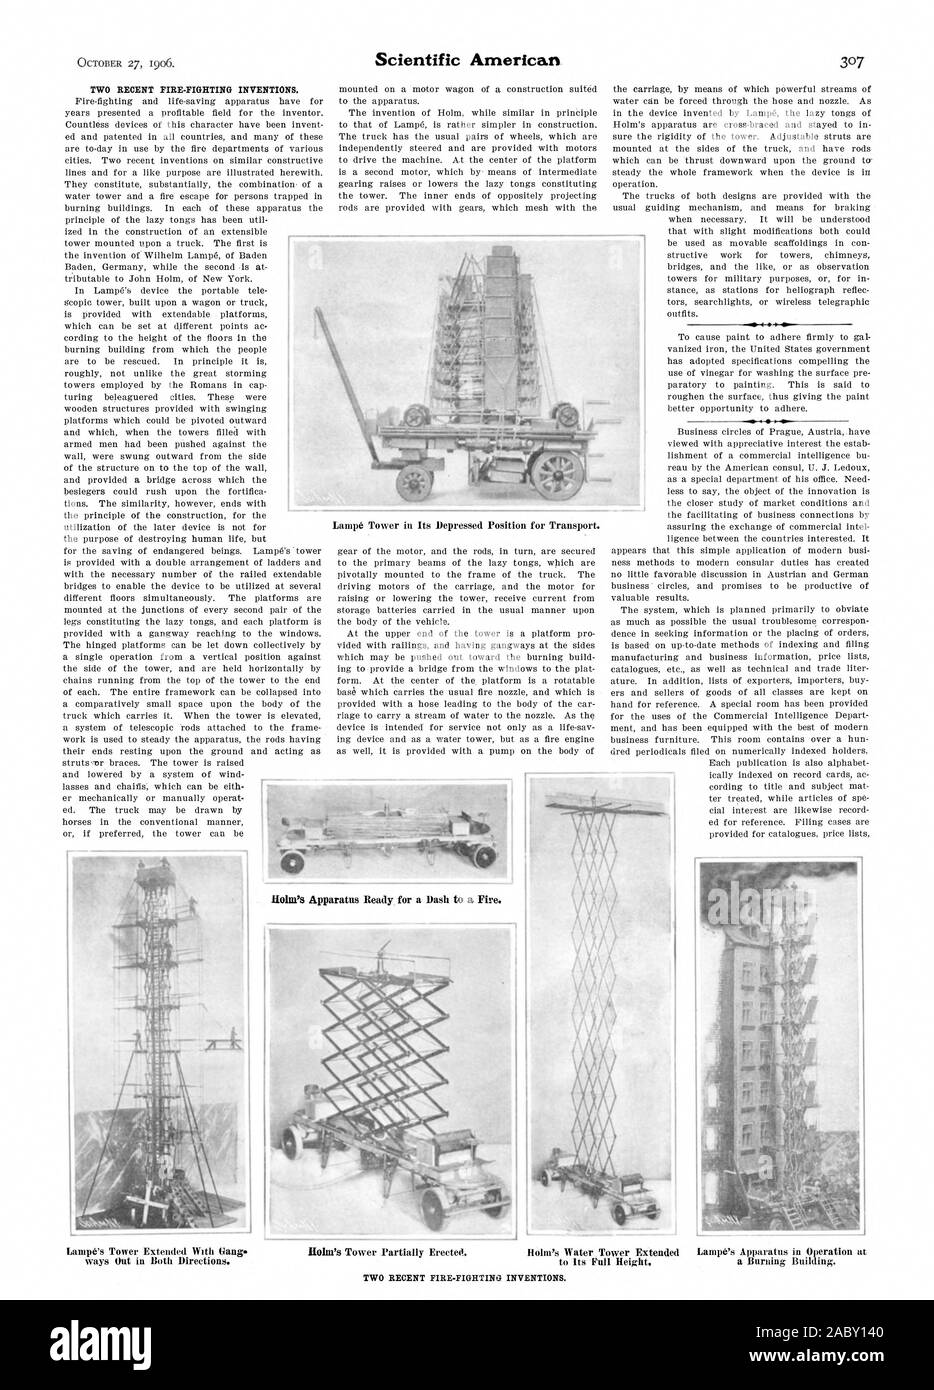 TWO RECENT FIRE-FIGHTING INVENTIONS., scientific american, 1906-10-27 Stock Photo